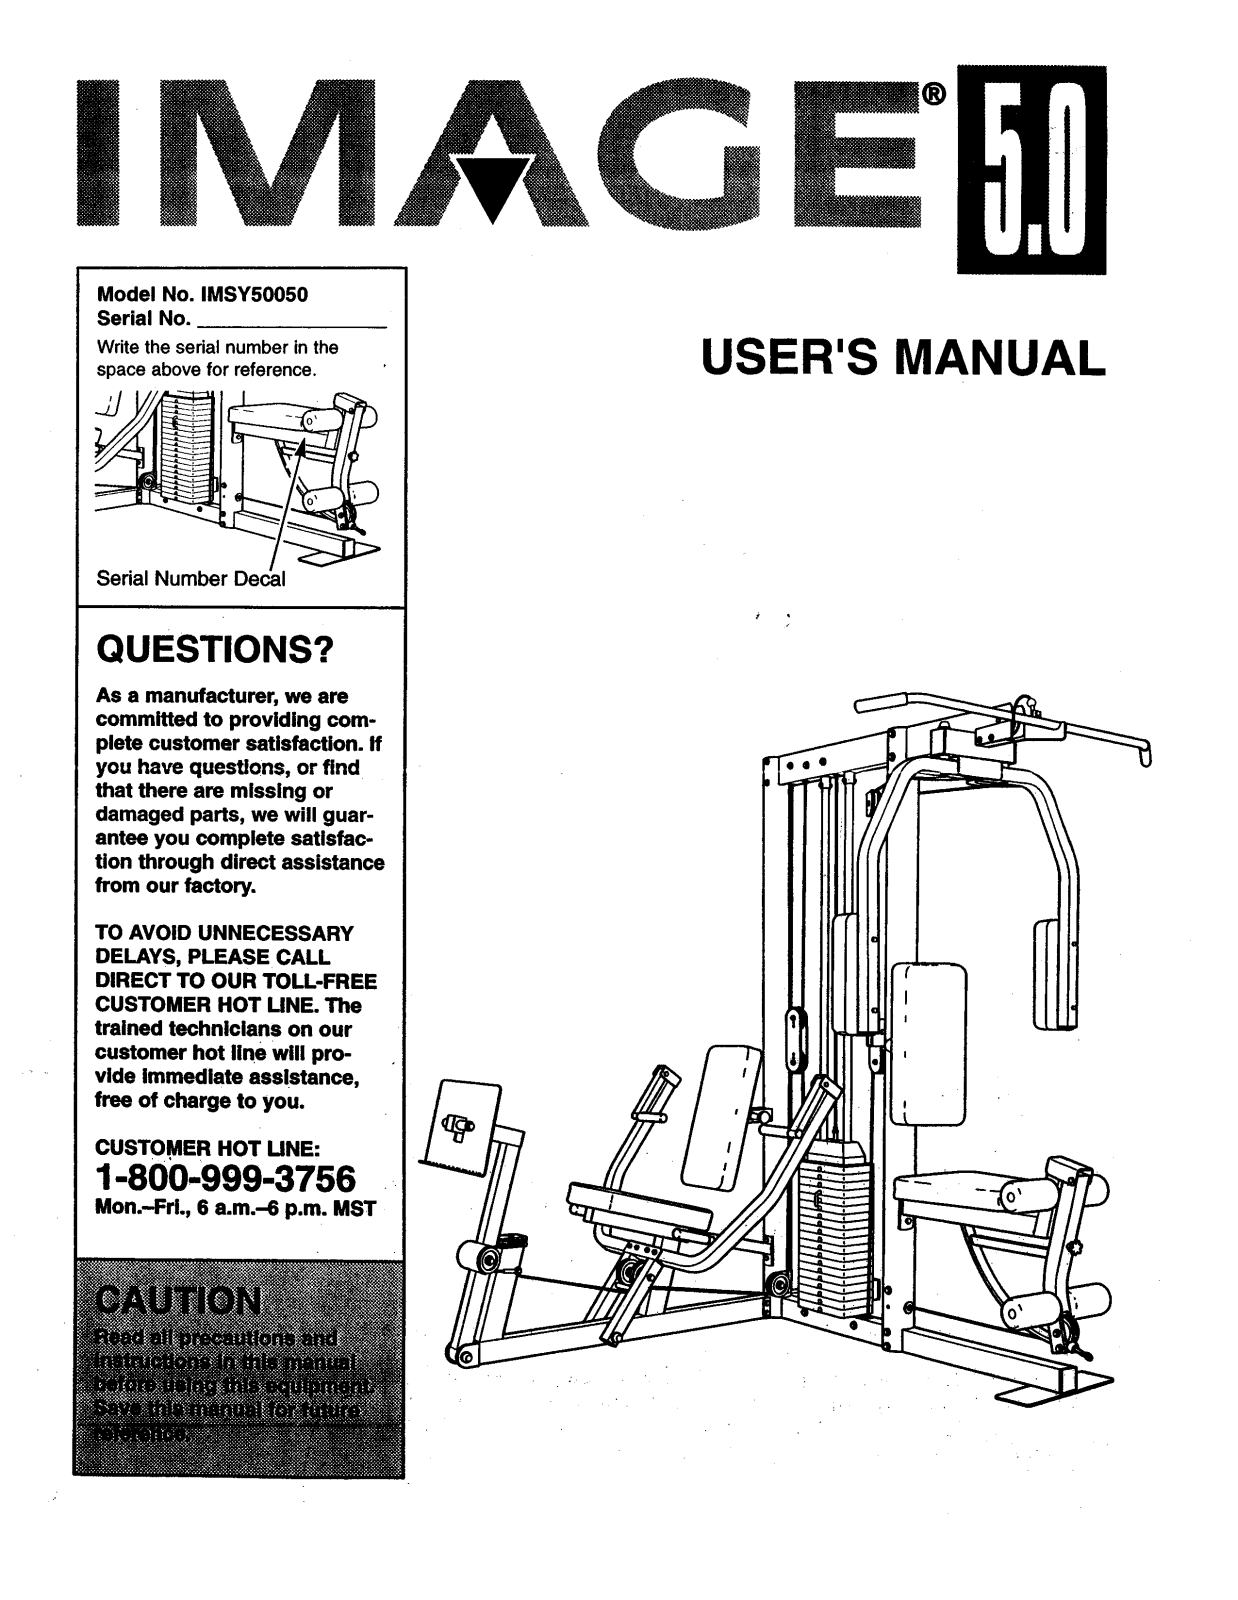 Image IMSY50050 Owner's Manual